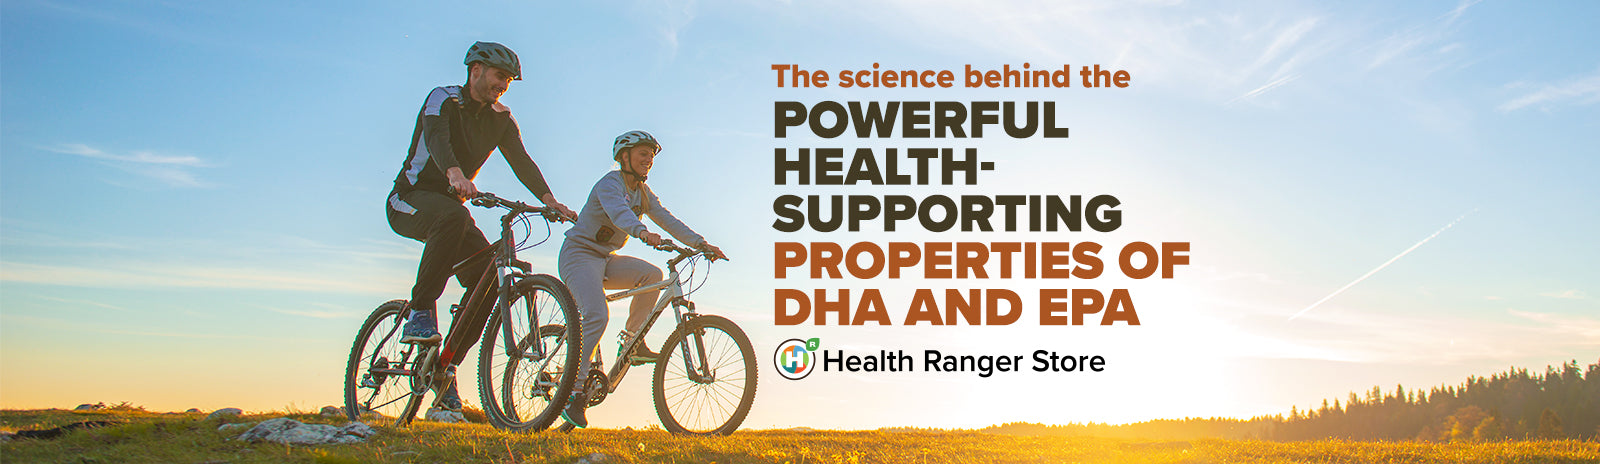 The science behind the powerful health-supporting properties of DHA and EPA